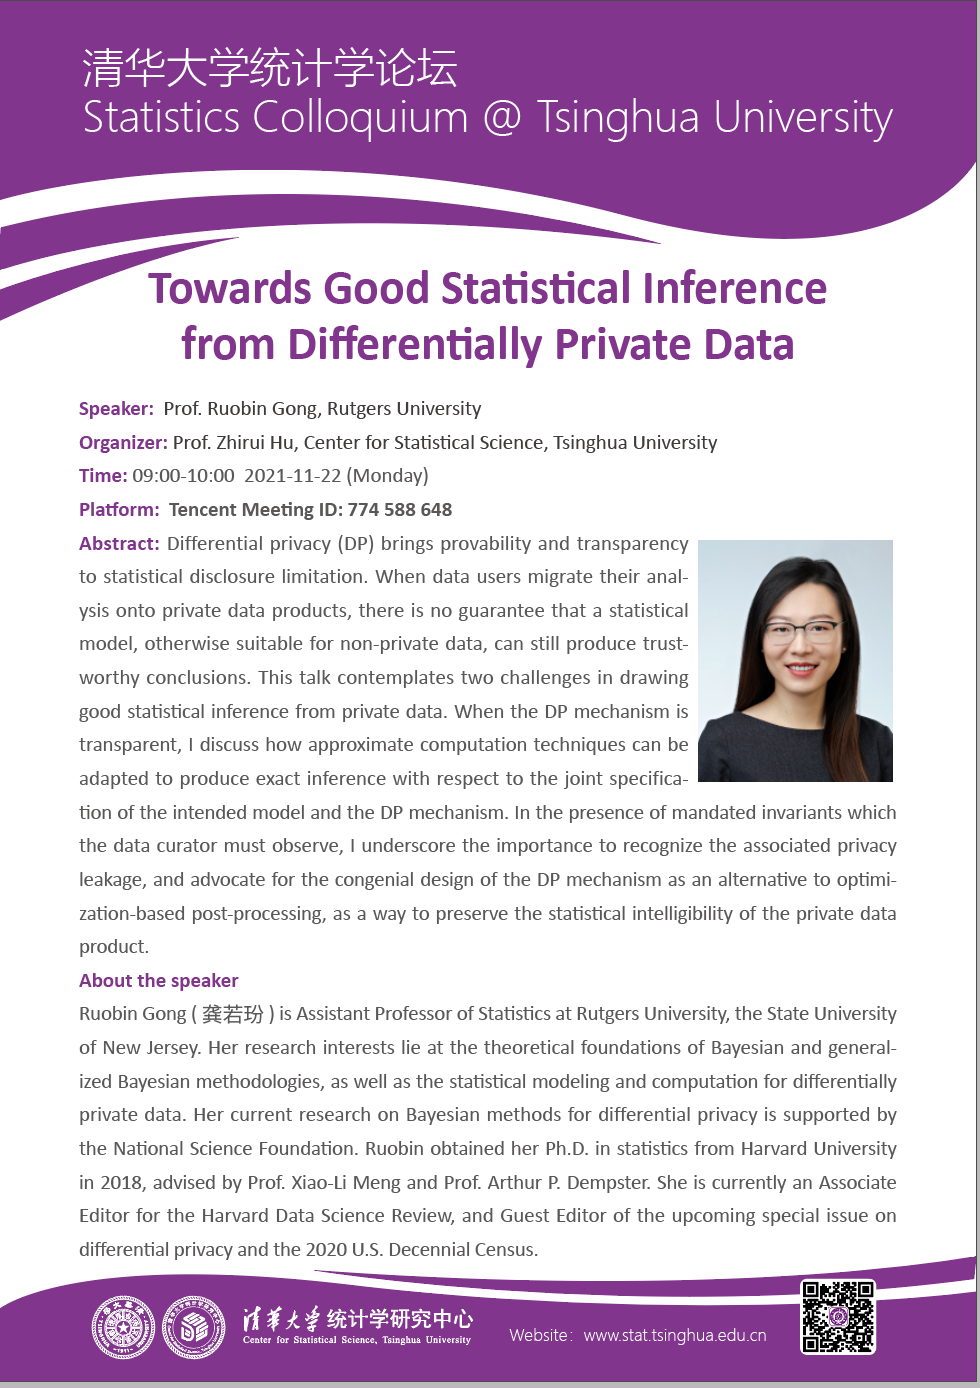 Towards Good Statistical Inference from Differentially Private Data